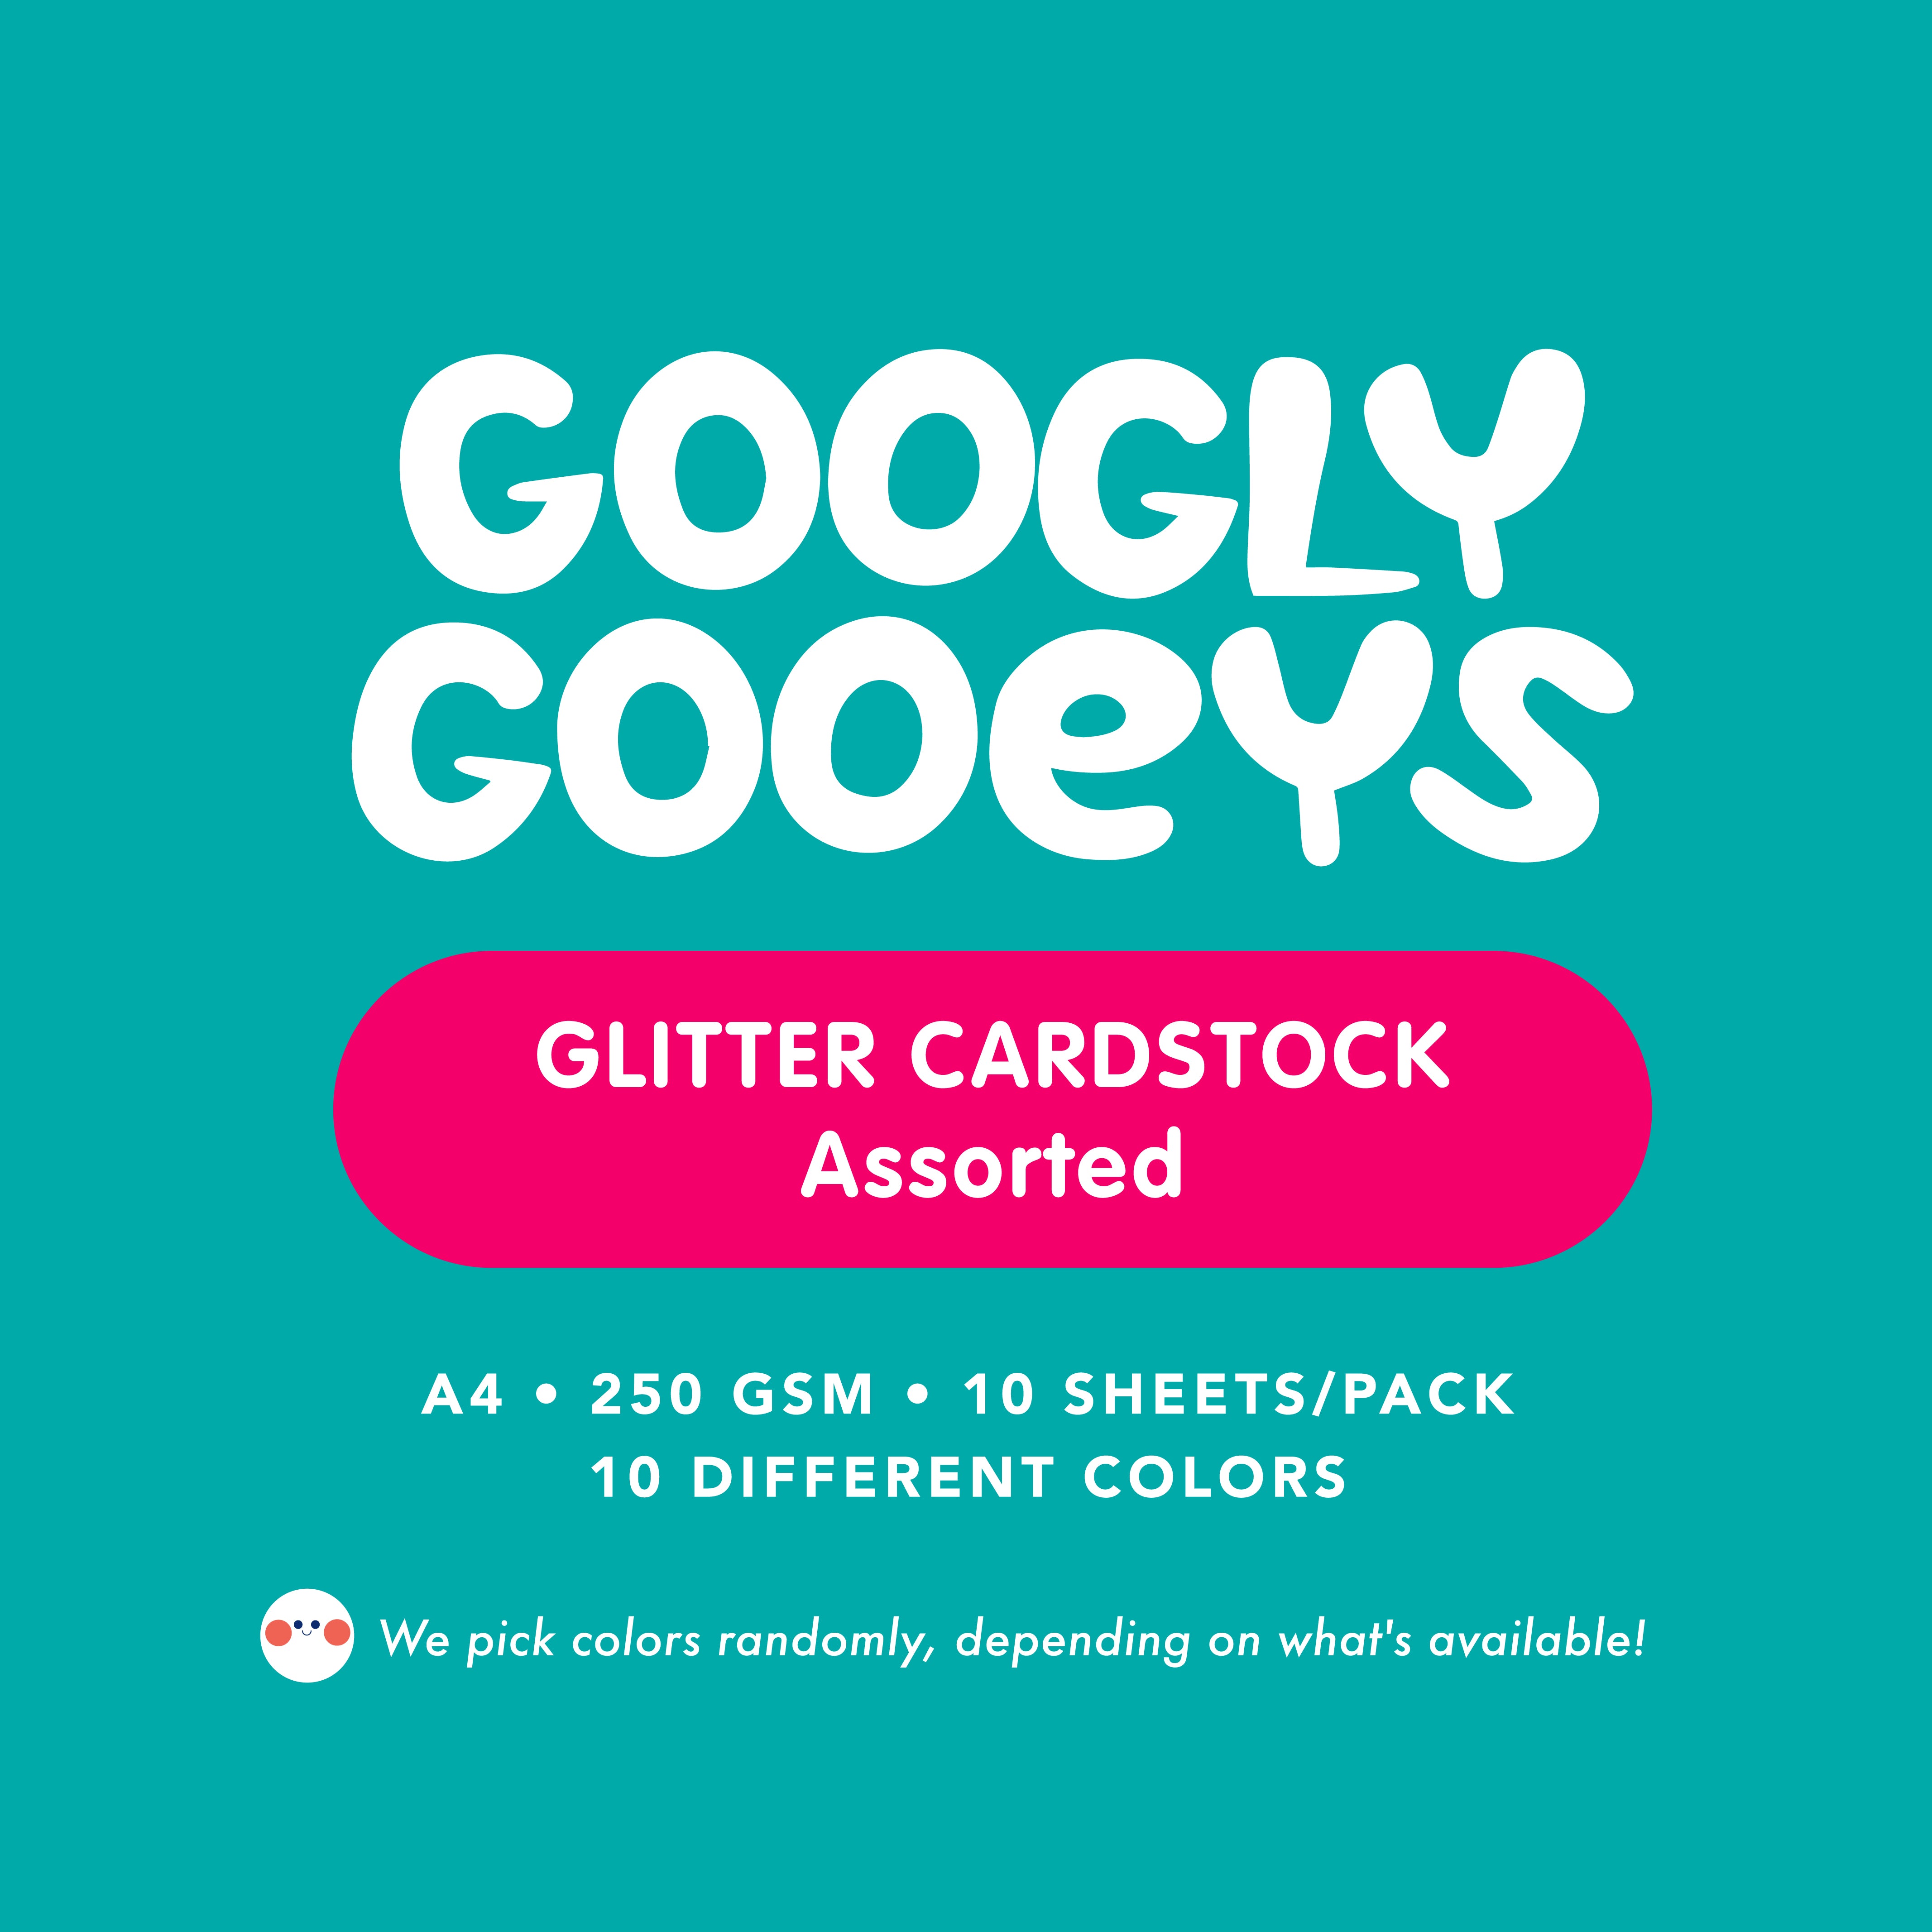 Googly Gooeys Glitter Cardstock for Crafting Projects | 200-250gsm (A4)